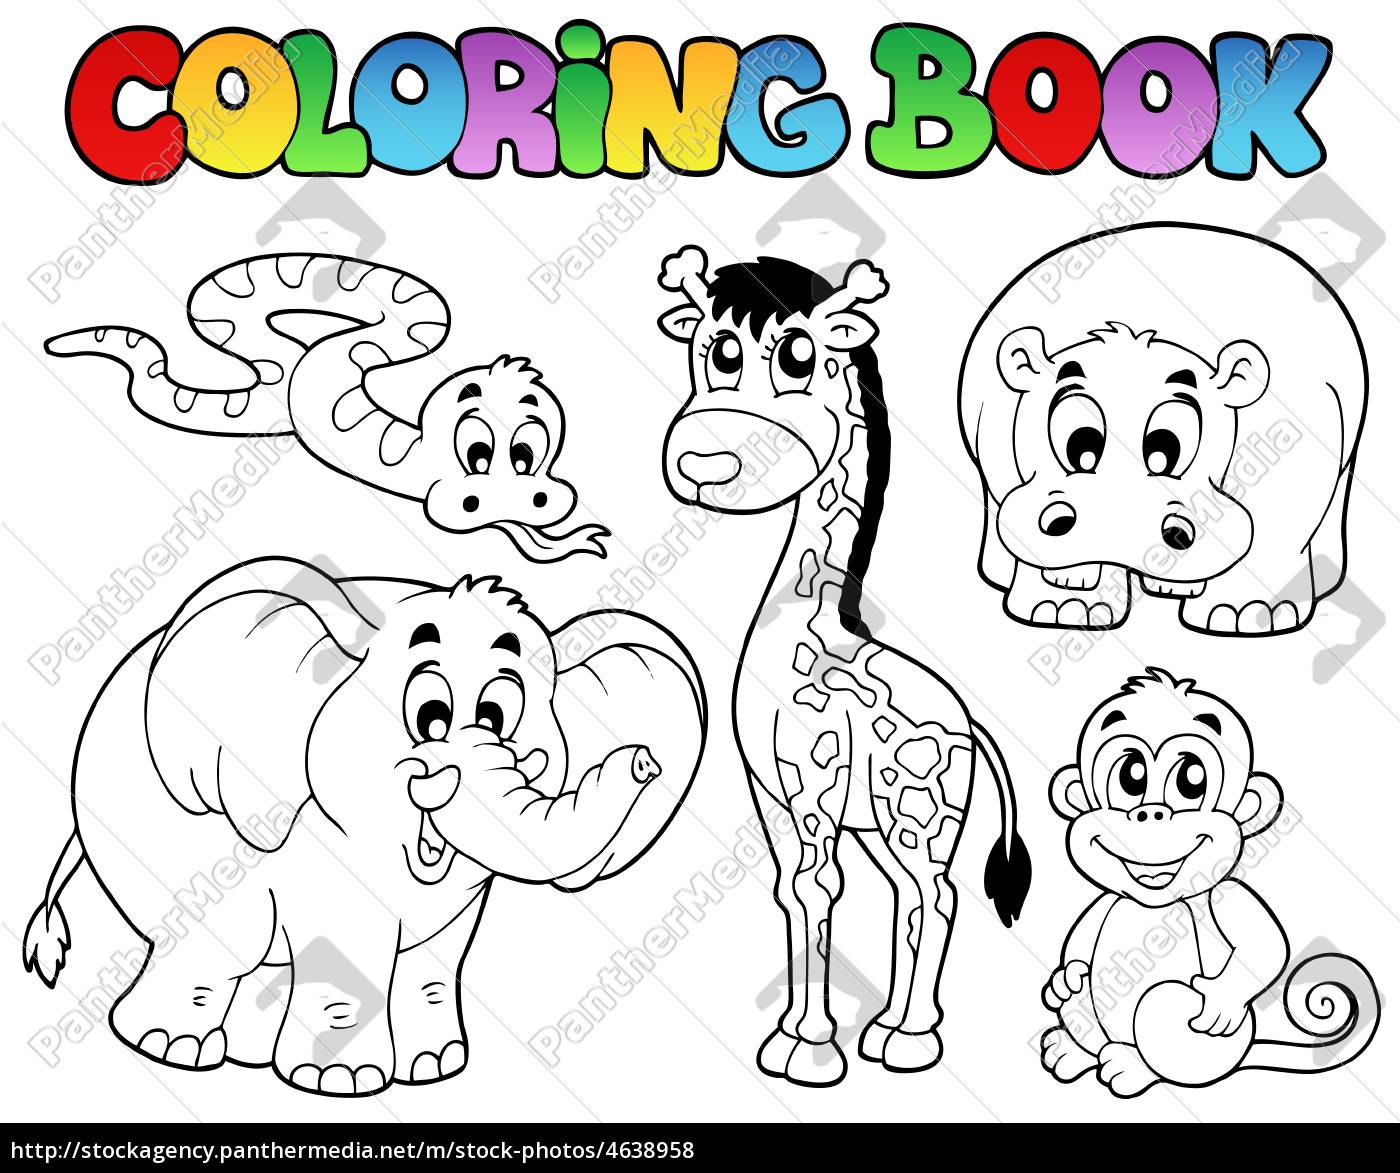 Coloring book with African animals   Stock image   20 ...